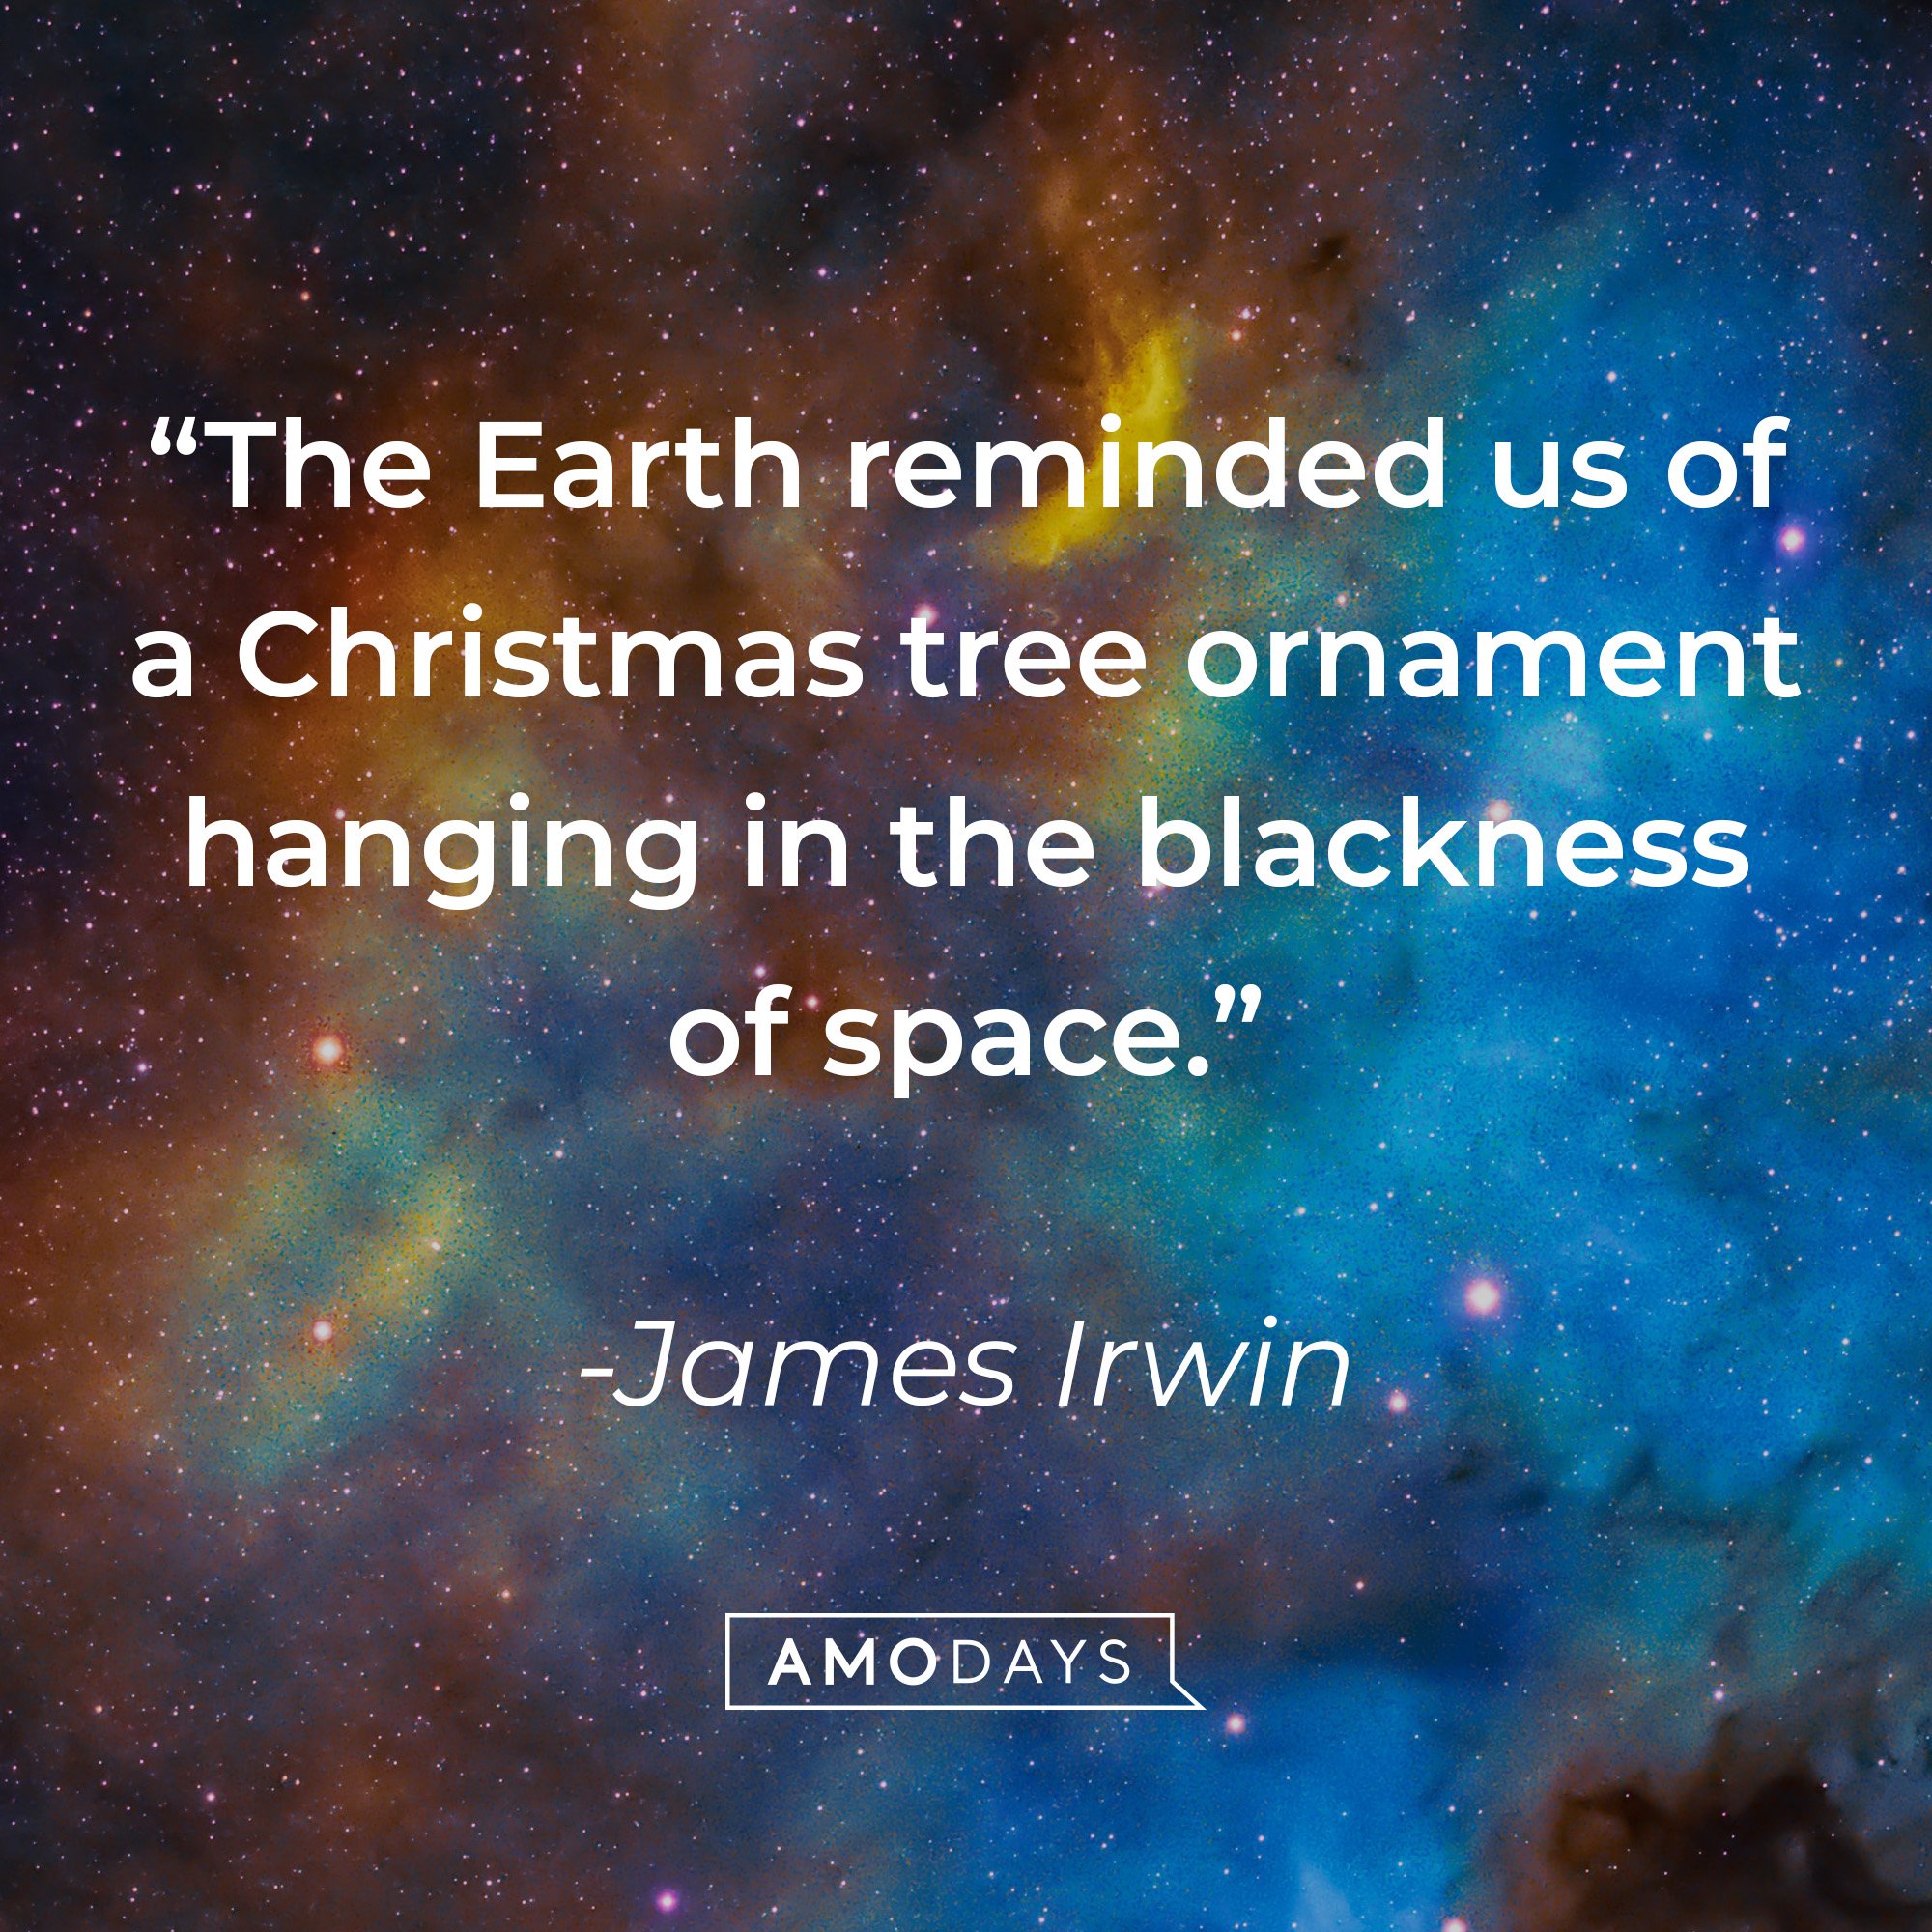 James Irwin’s quote: “The Earth reminded us of a Christmas tree ornament hanging in the blackness of space.” | Image: AmoDays